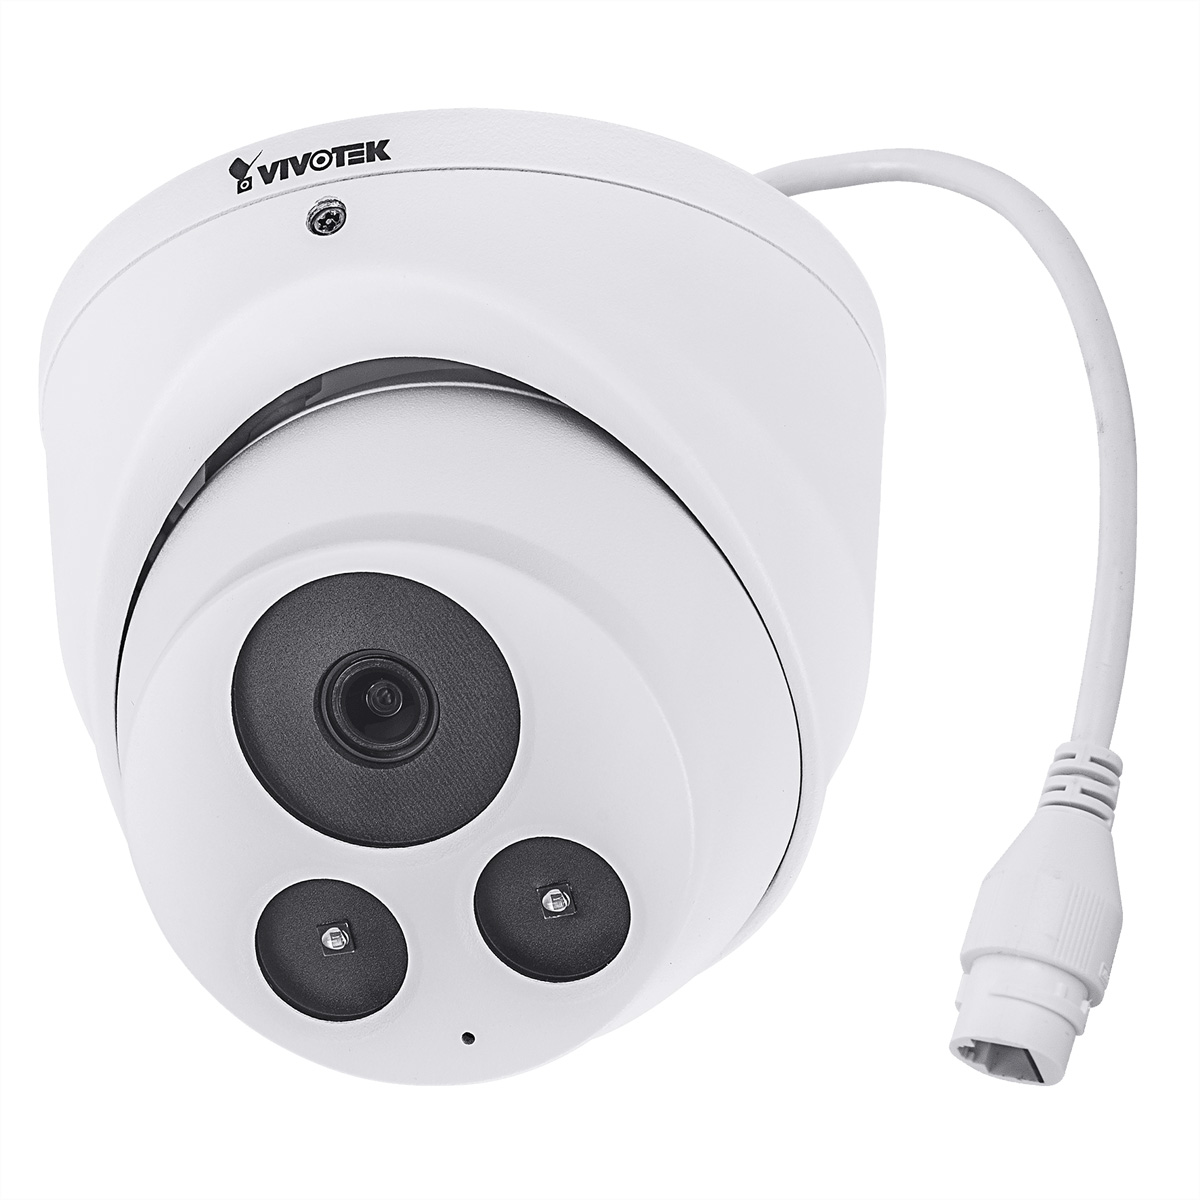 VIVOTEK C-SERIE IT9360-H Turret Fixed Dome IP Kamera 2MP, Outdoor, IR, 2,8mm Flat-faced Dome, 2MP 30